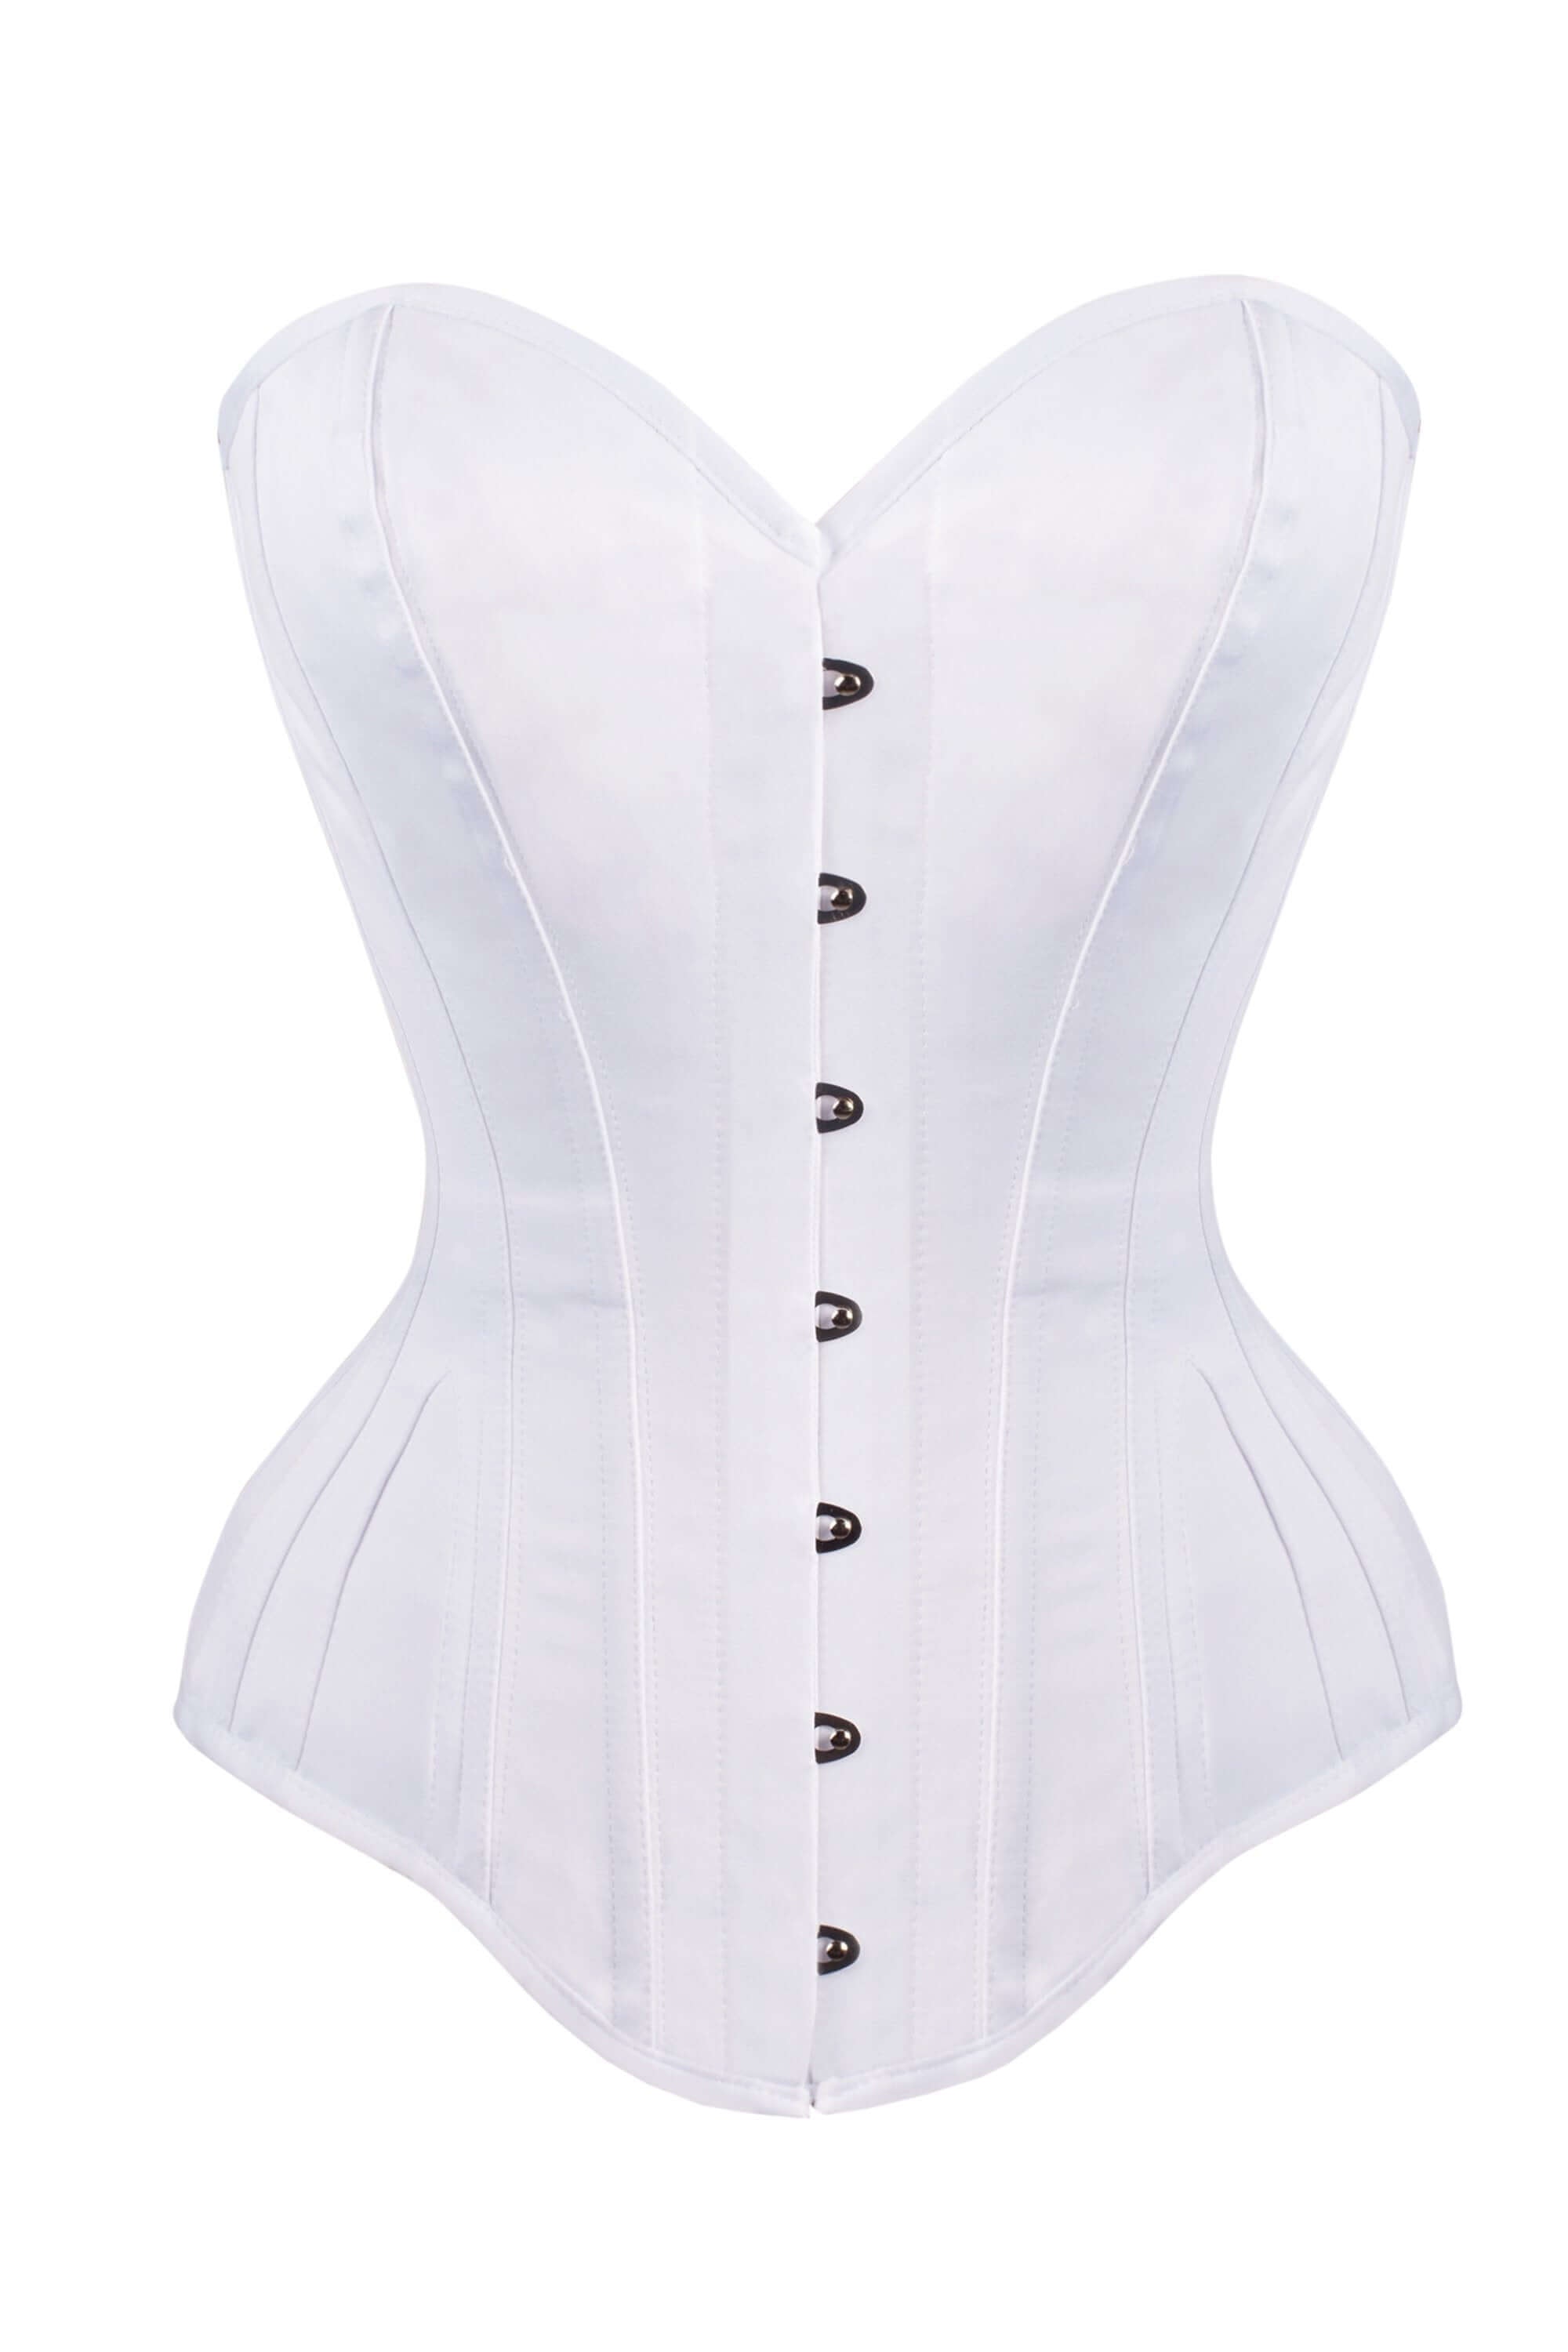 Waist Trainer Classic Corset – Curves and Comfort